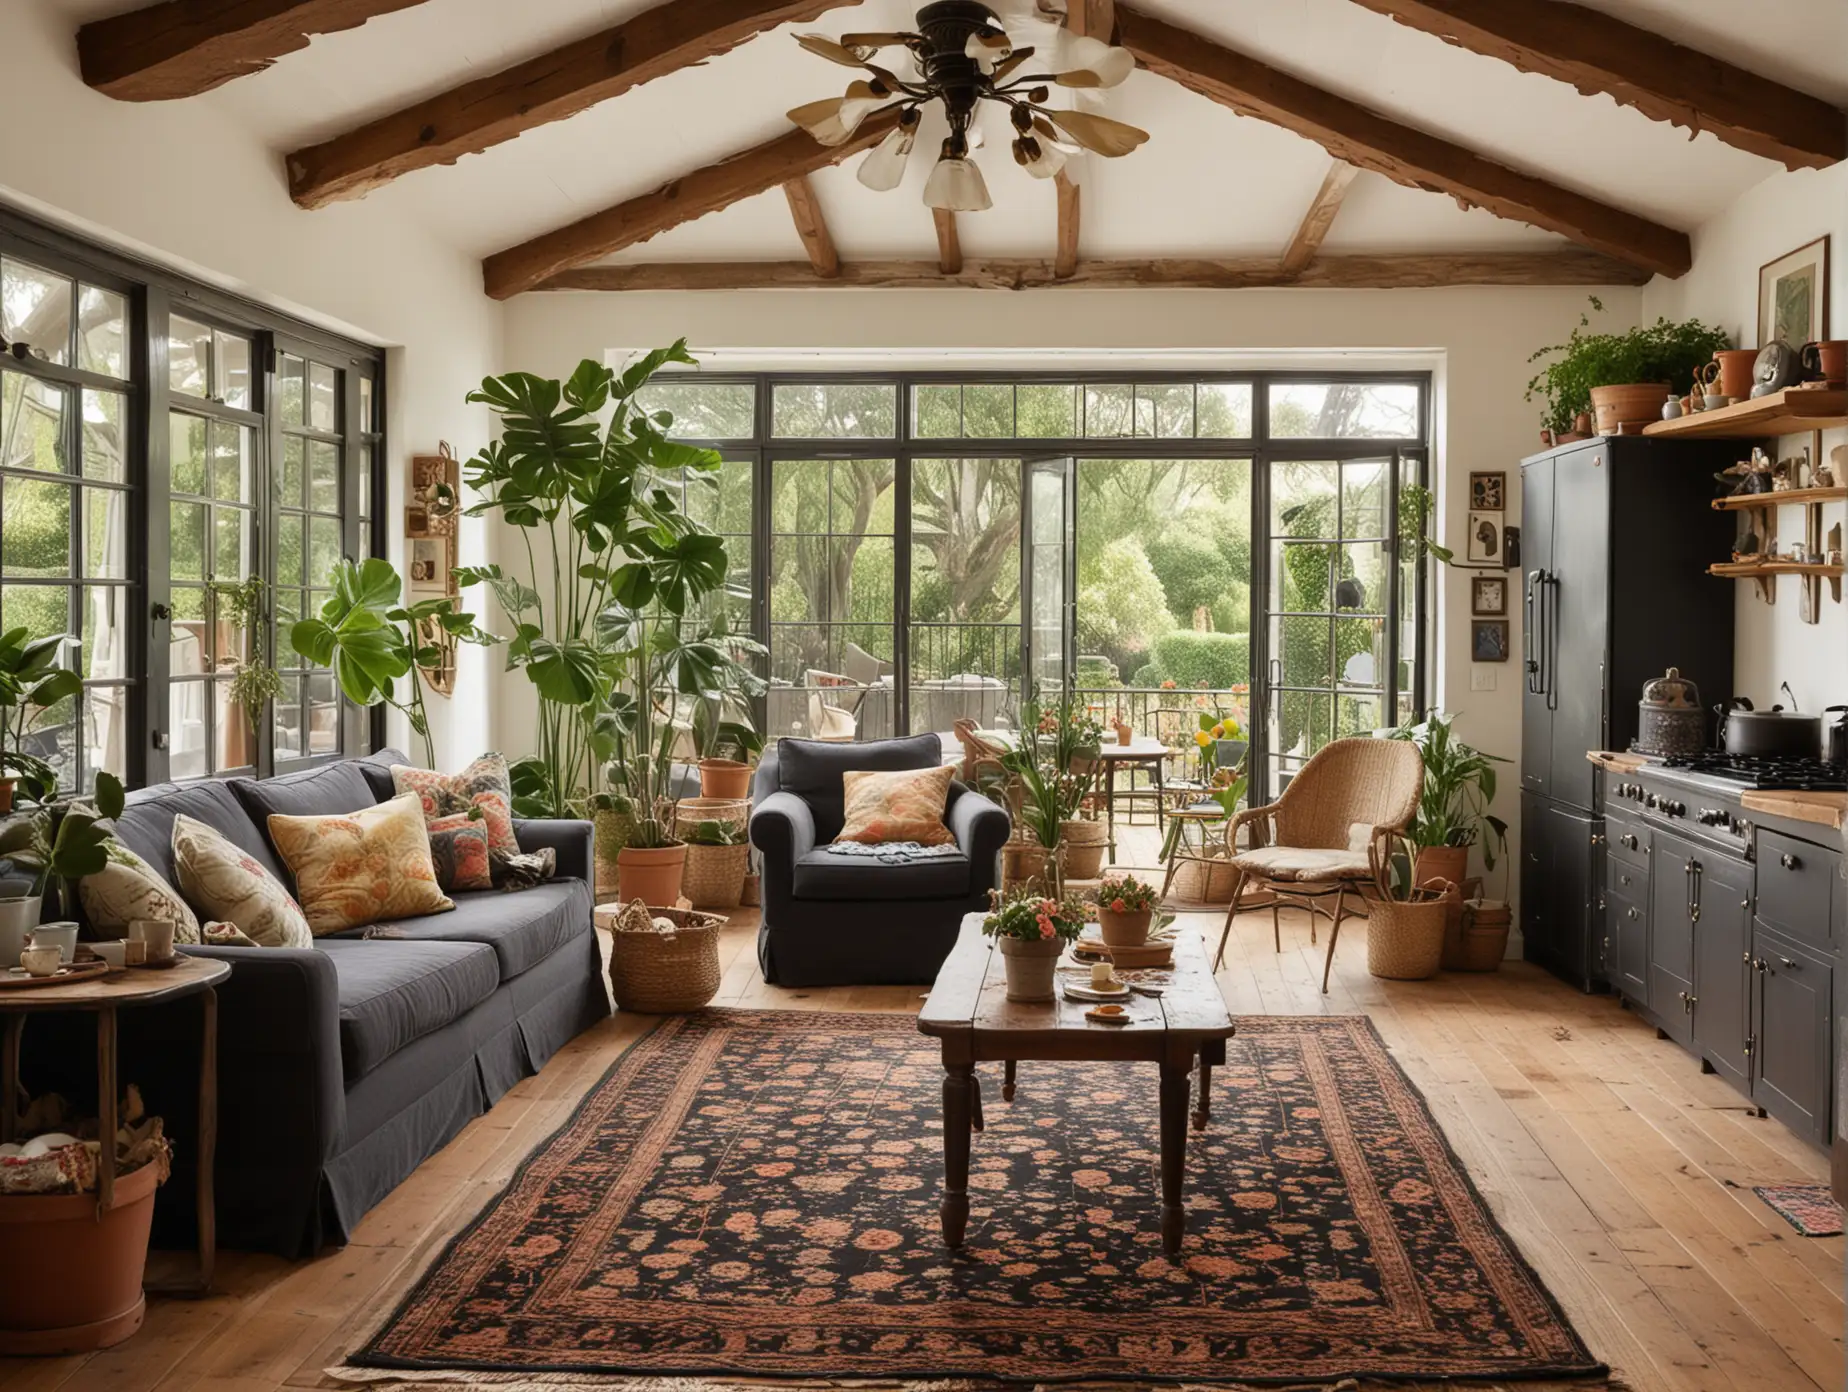 Vintage Sitting Room with Kitchen and frontyard Views in a Large Space: Create a vintage-inspired sitting room in a large and spacious setting, with views into a dining area Use wooden furniture and rustic decor items like vintage cameras and antique rugs. The kitchen should have black cabinets and appliances, while the frontyard should feature potted flowers and a thatched roof. Add house plants like monstera indoors.